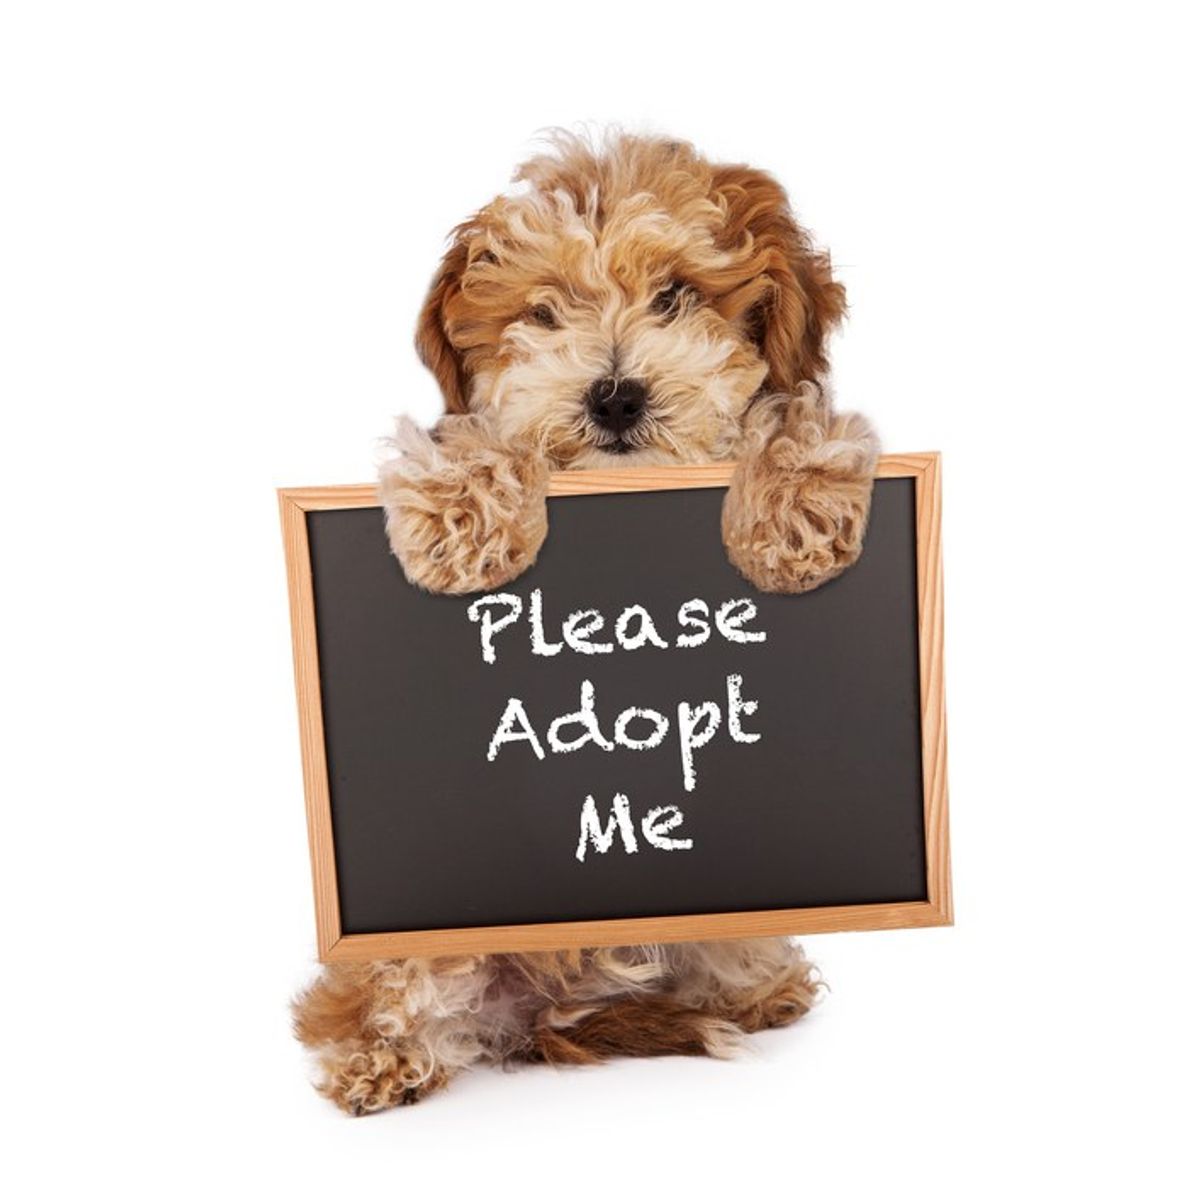 3 Reasons Why You Should Consider Adopting Your Next Dog